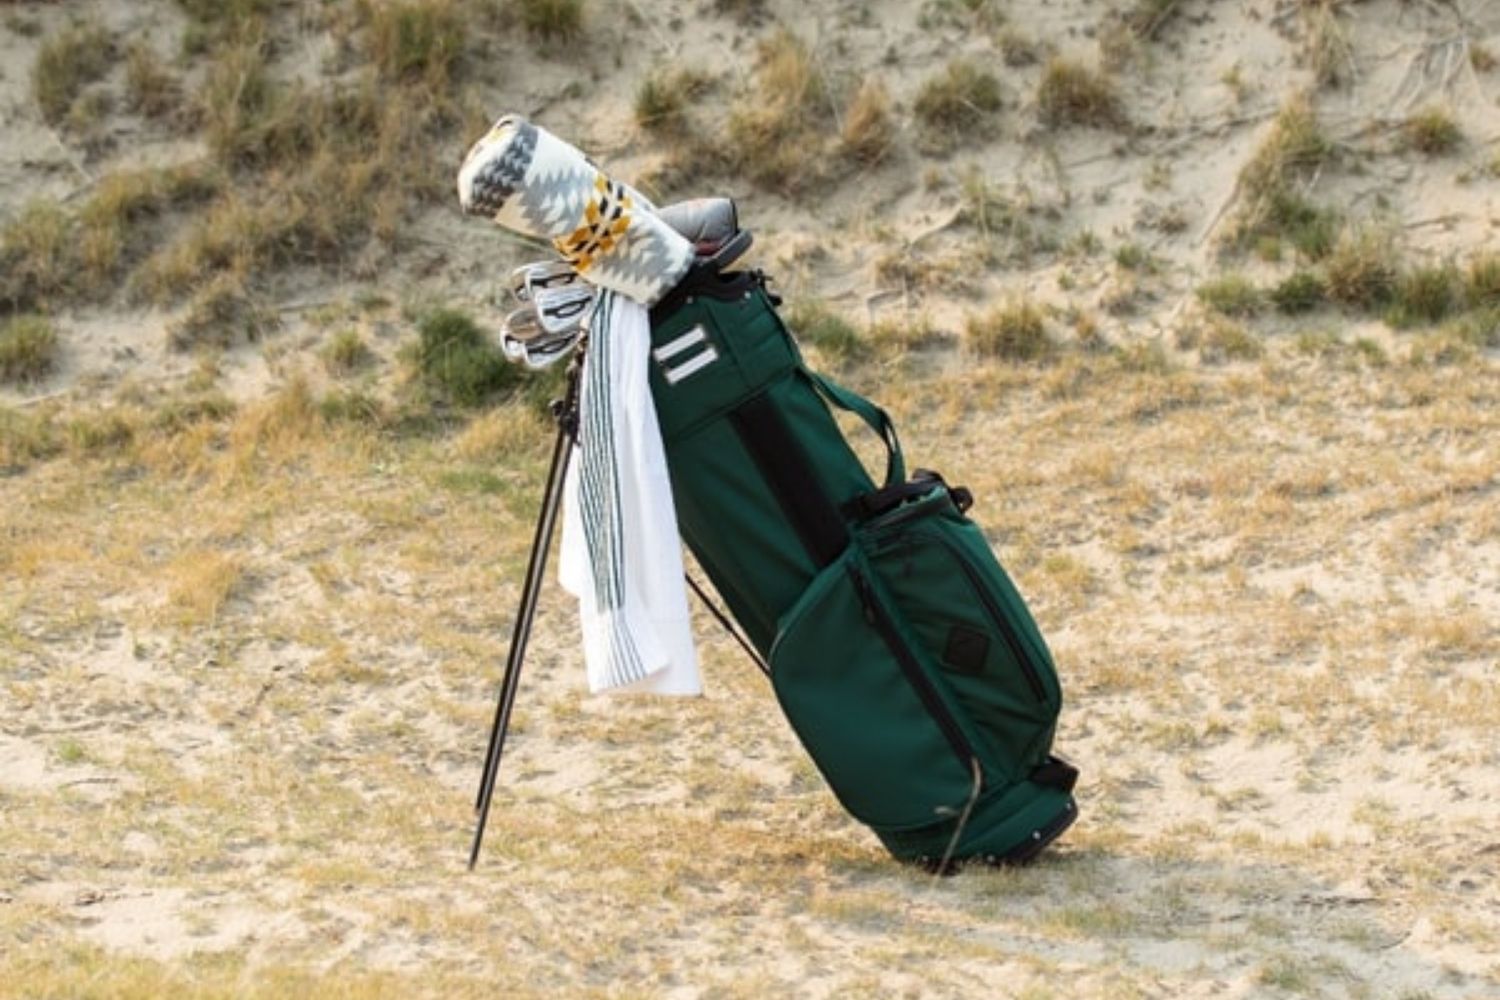 Hit The Links With This Fresh New Golf Bag From Jones Sports Co.